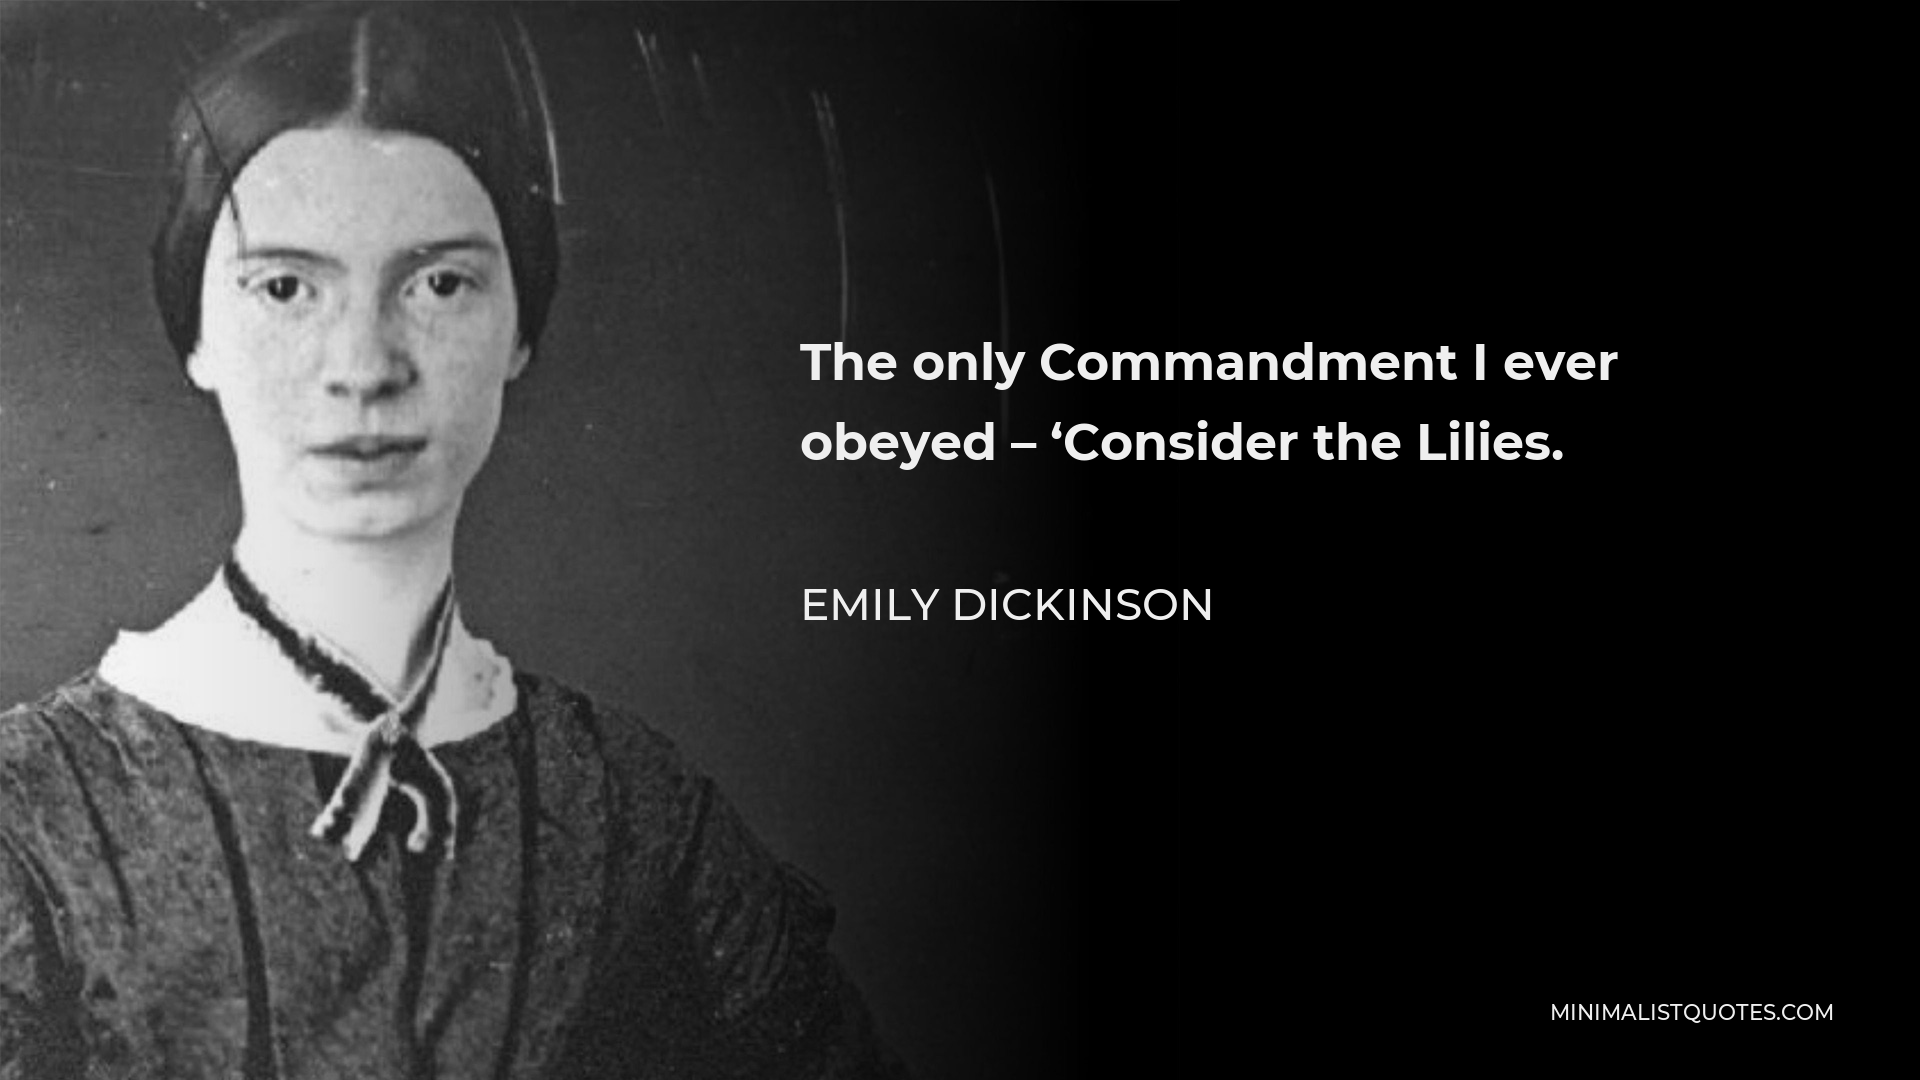 Emily Dickinson Quote - The only Commandment I ever obeyed – ‘Consider the Lilies.